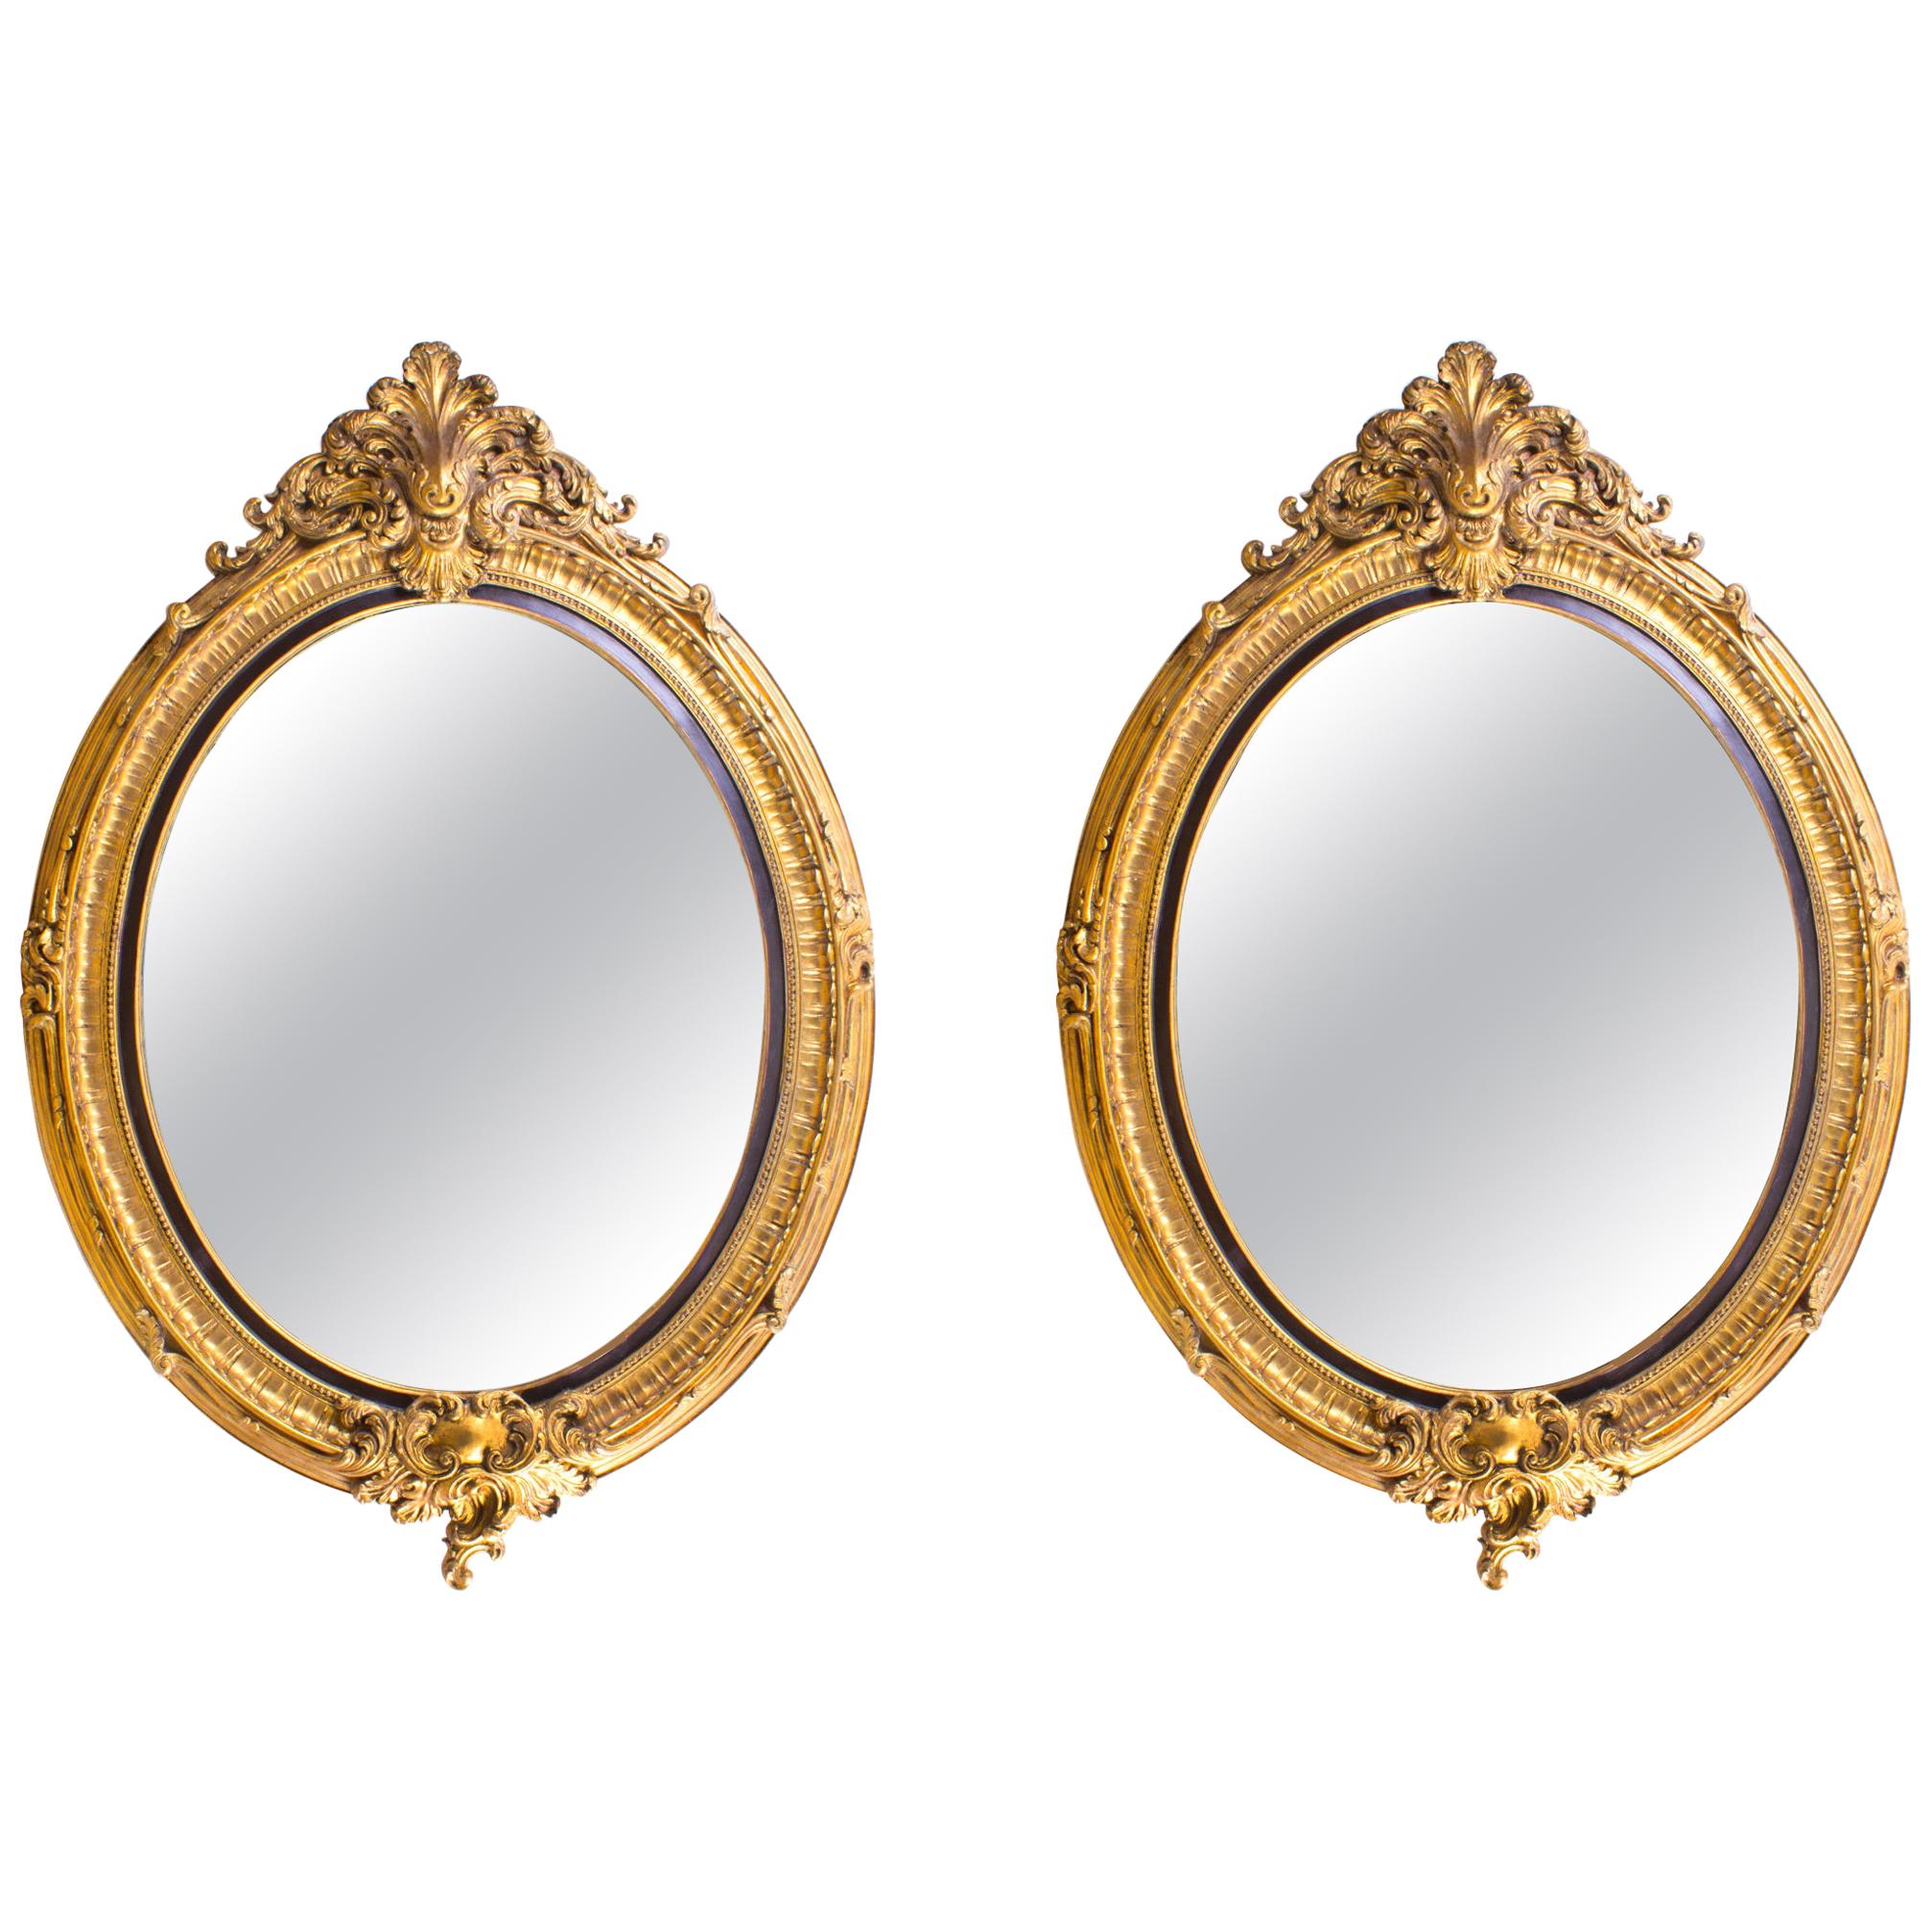 Pair of Beautiful Large Rococo Style Gilded Oval Mirrors